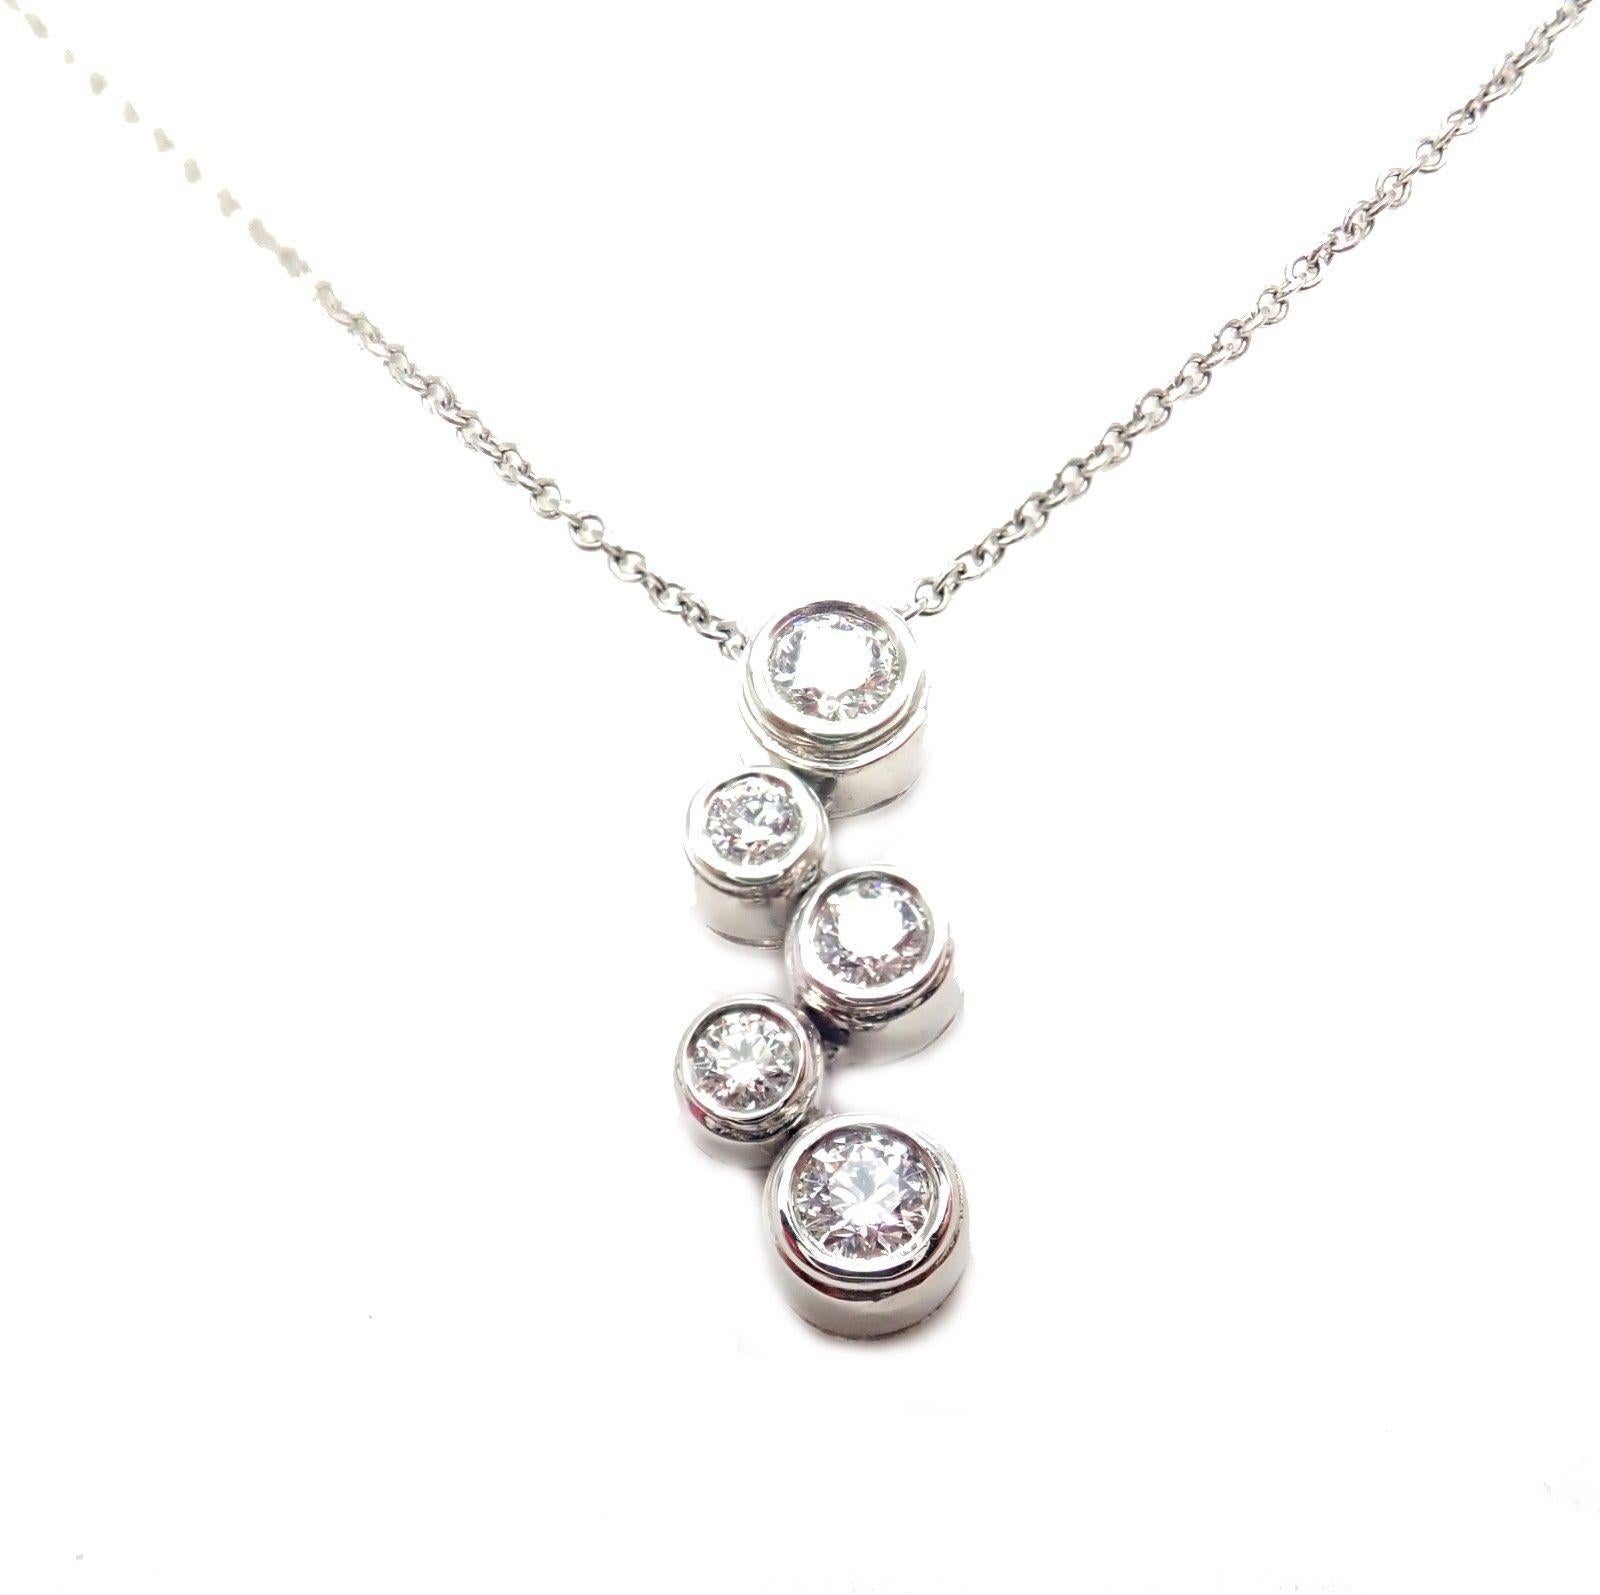 Platinum Diamond Bubbles Pendant Necklace by Tiffany & Co. 
With 5x diamonds VS1 clarity, G color total weight approx. .50ctw
This necklace comes with Tiffany & Co box and a pouch.
Details: 
Measurements: Chain Length: 16